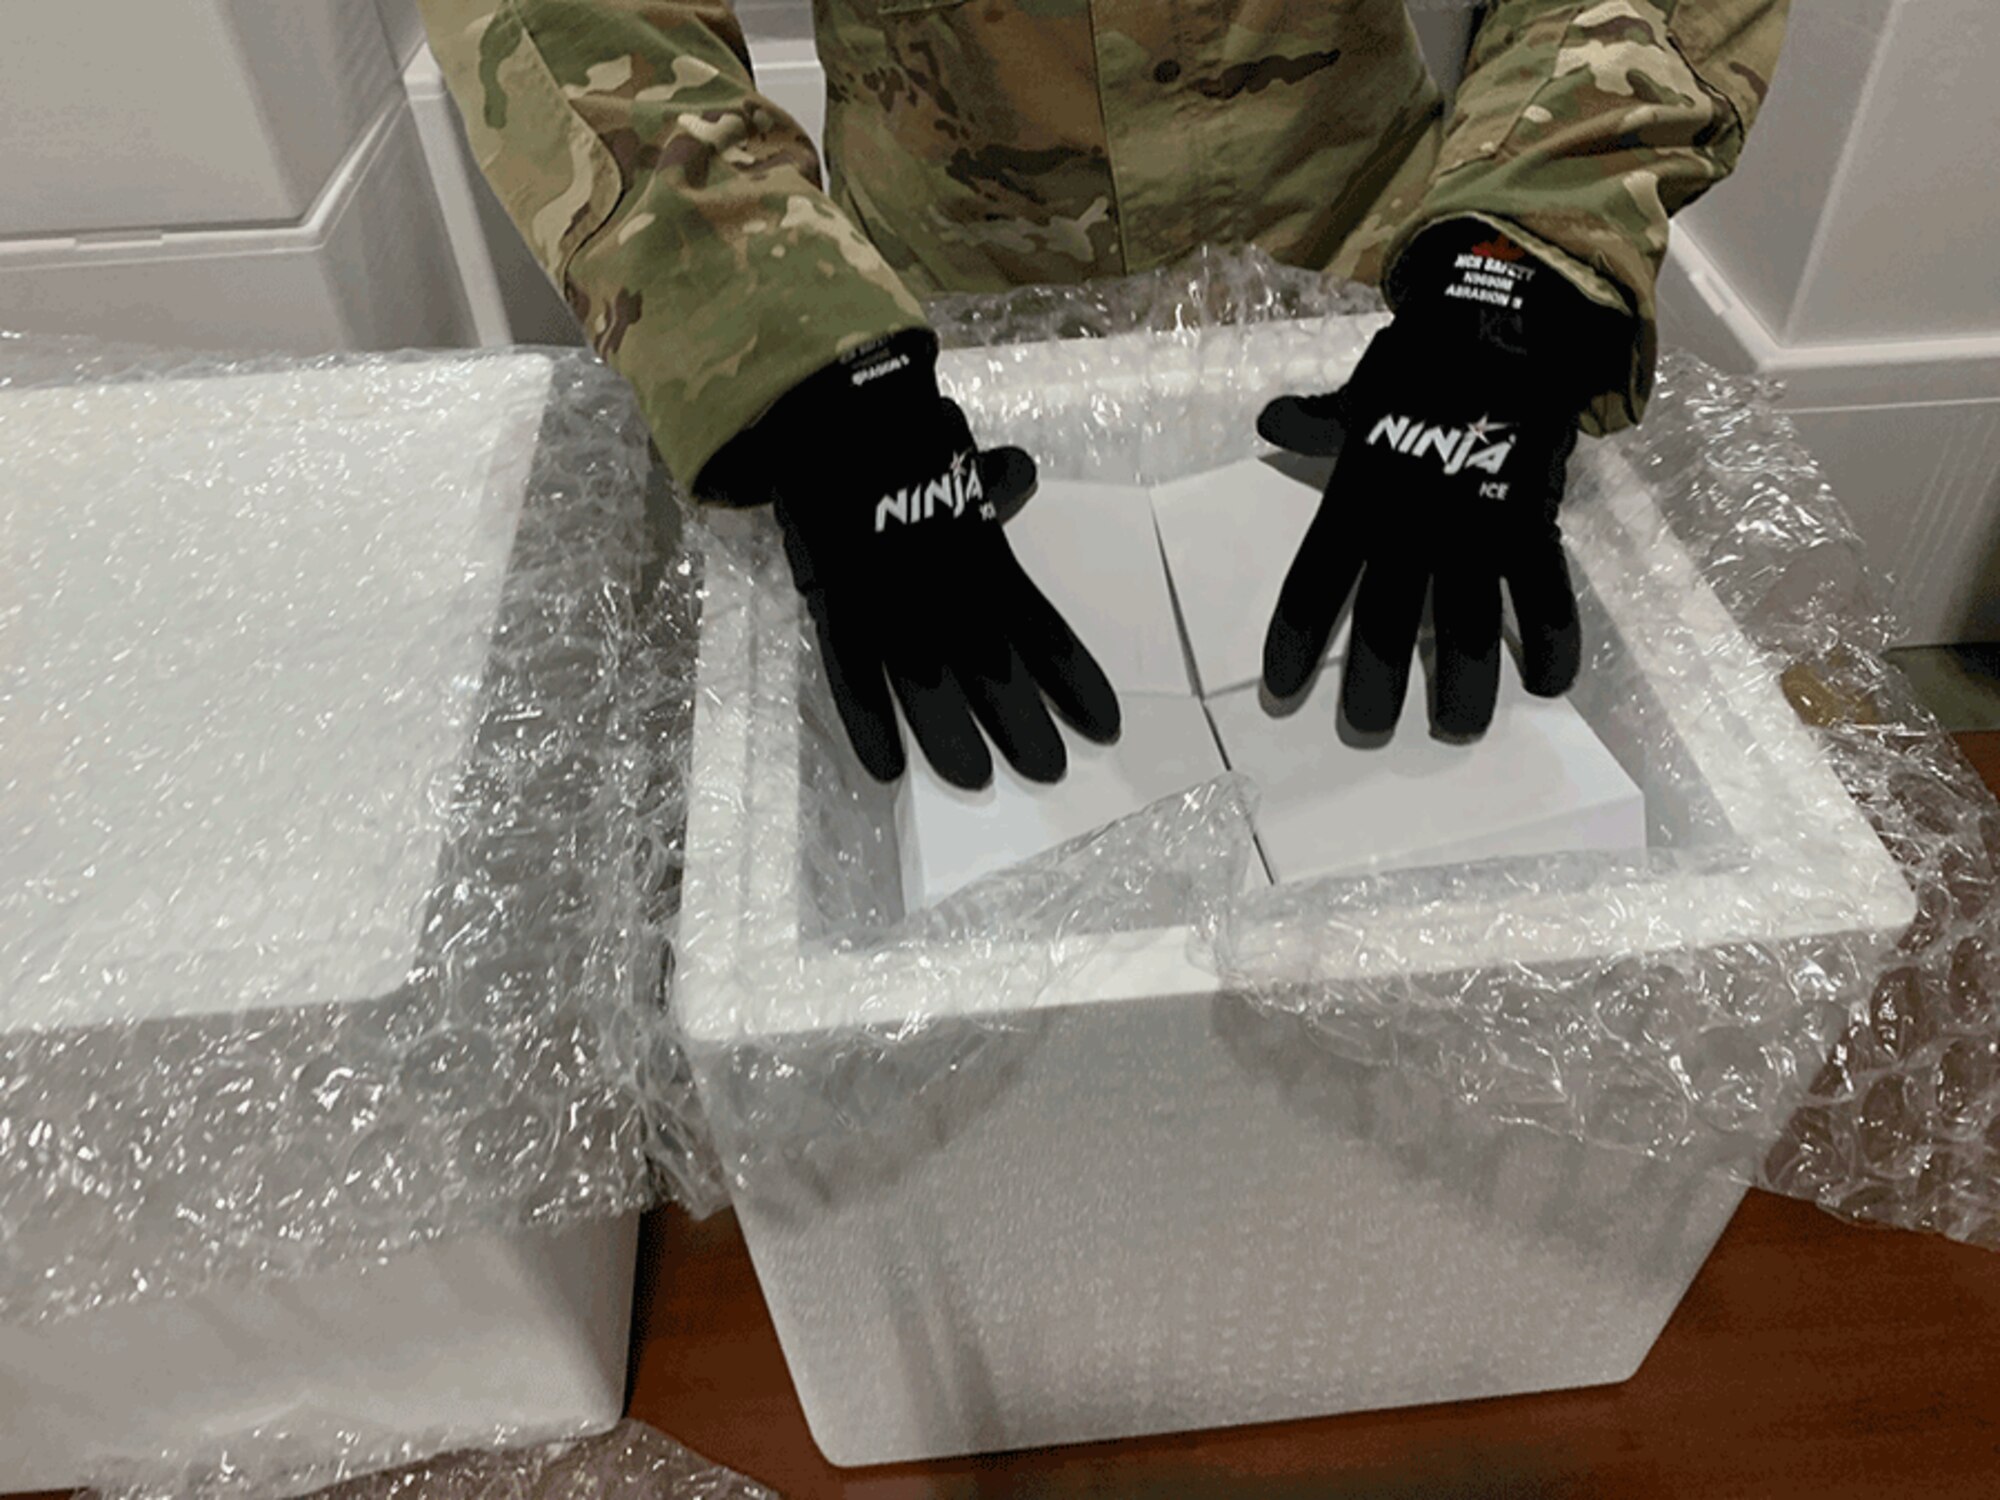 An Ohio National Guard member wears special gloves while practicing to pack glass vials in dry ice in preparation for when Ohio begins receiving the COVID-19 vaccine. About two dozen Ohio National Guard members have been working with the Ohio Department of Health to develop the logistics plan to receive and repackage the vaccine for distribution.